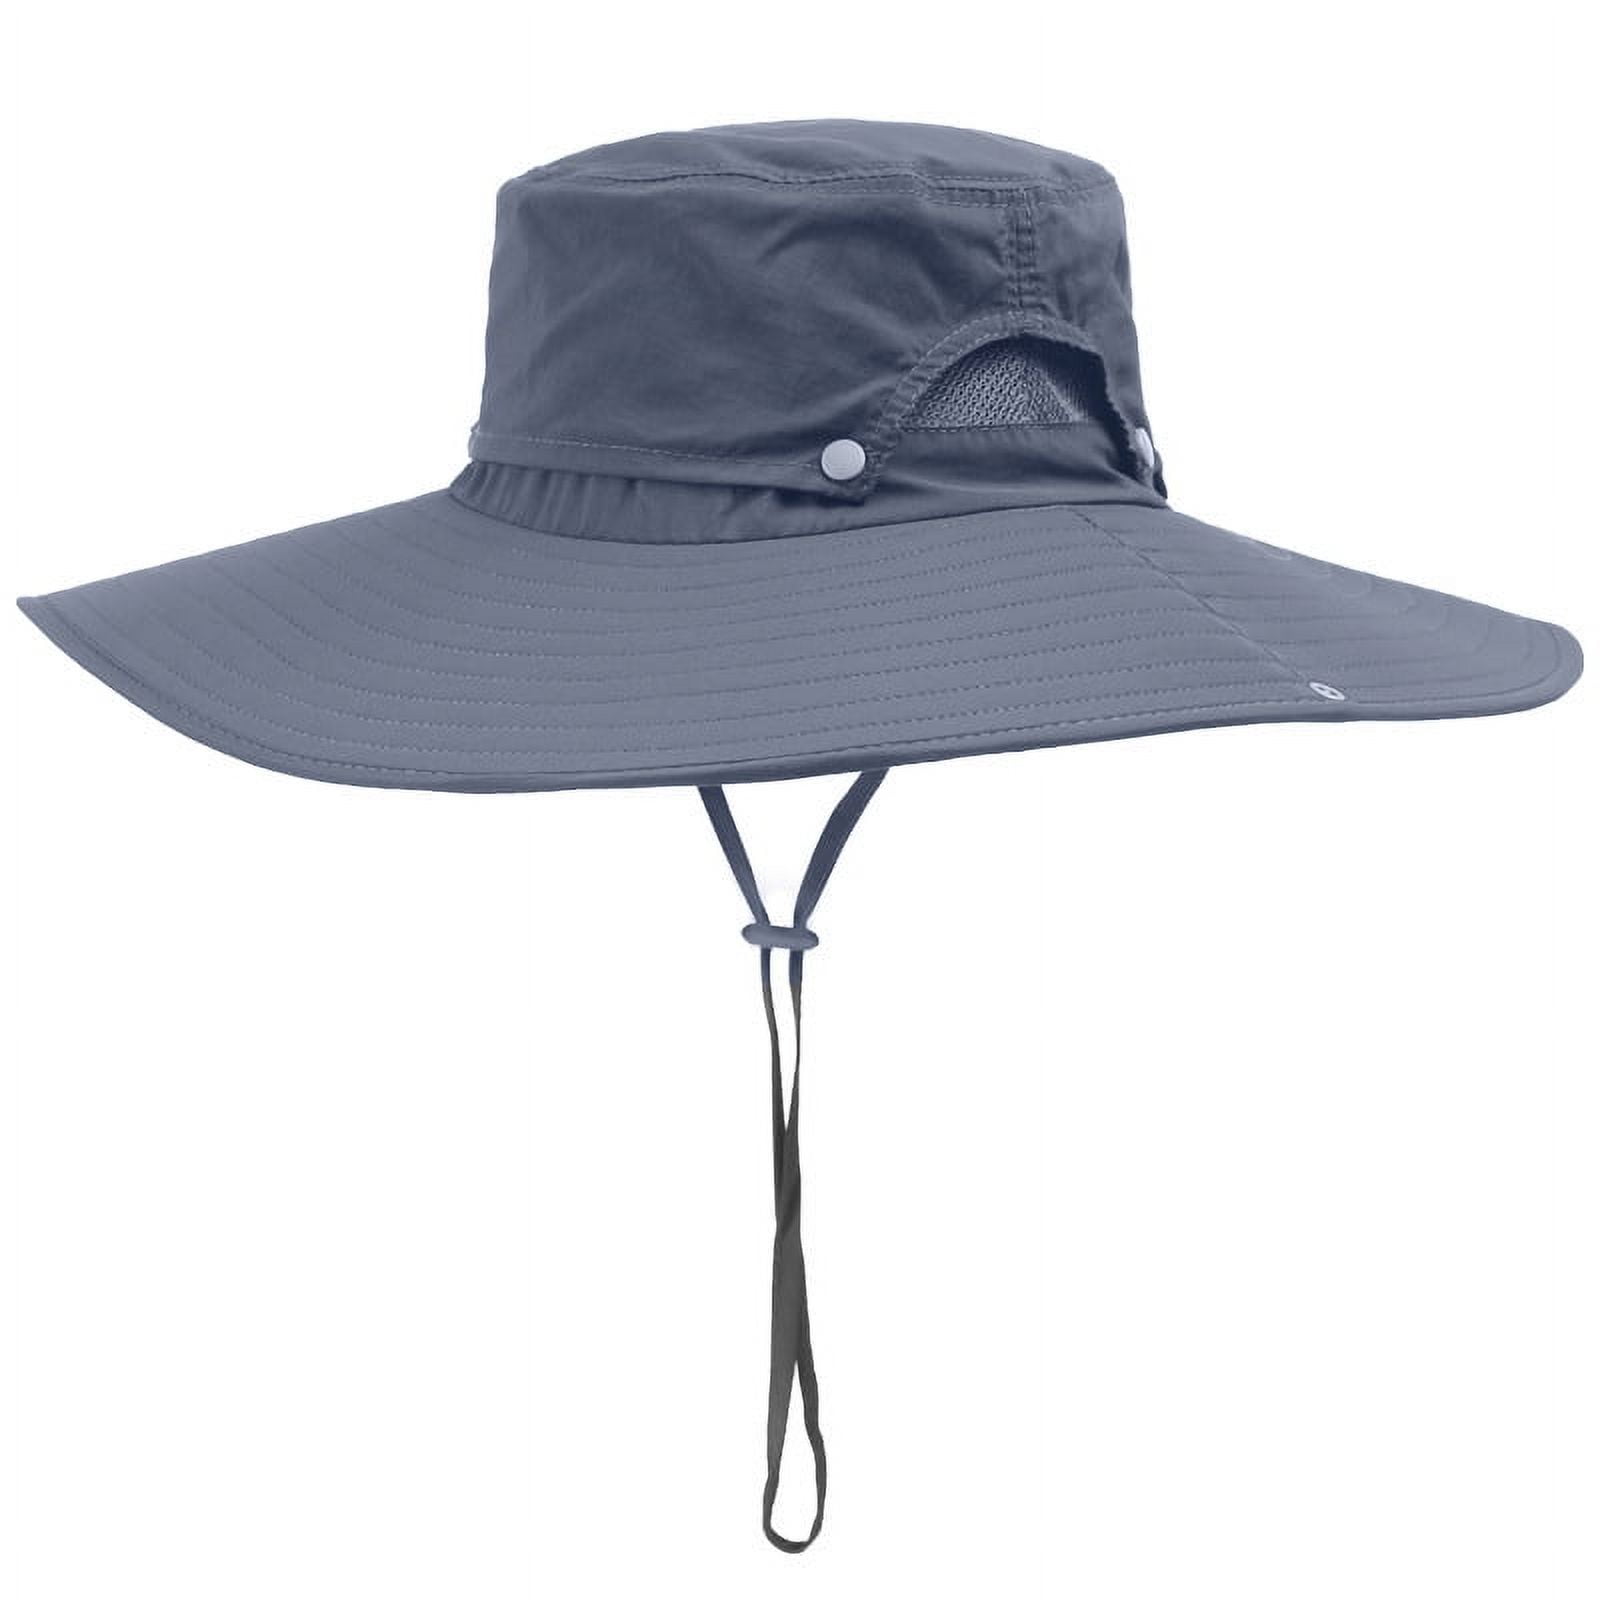 Sun Hat Fishing Hat for Men Beach Hat - Wide Brim Hat with